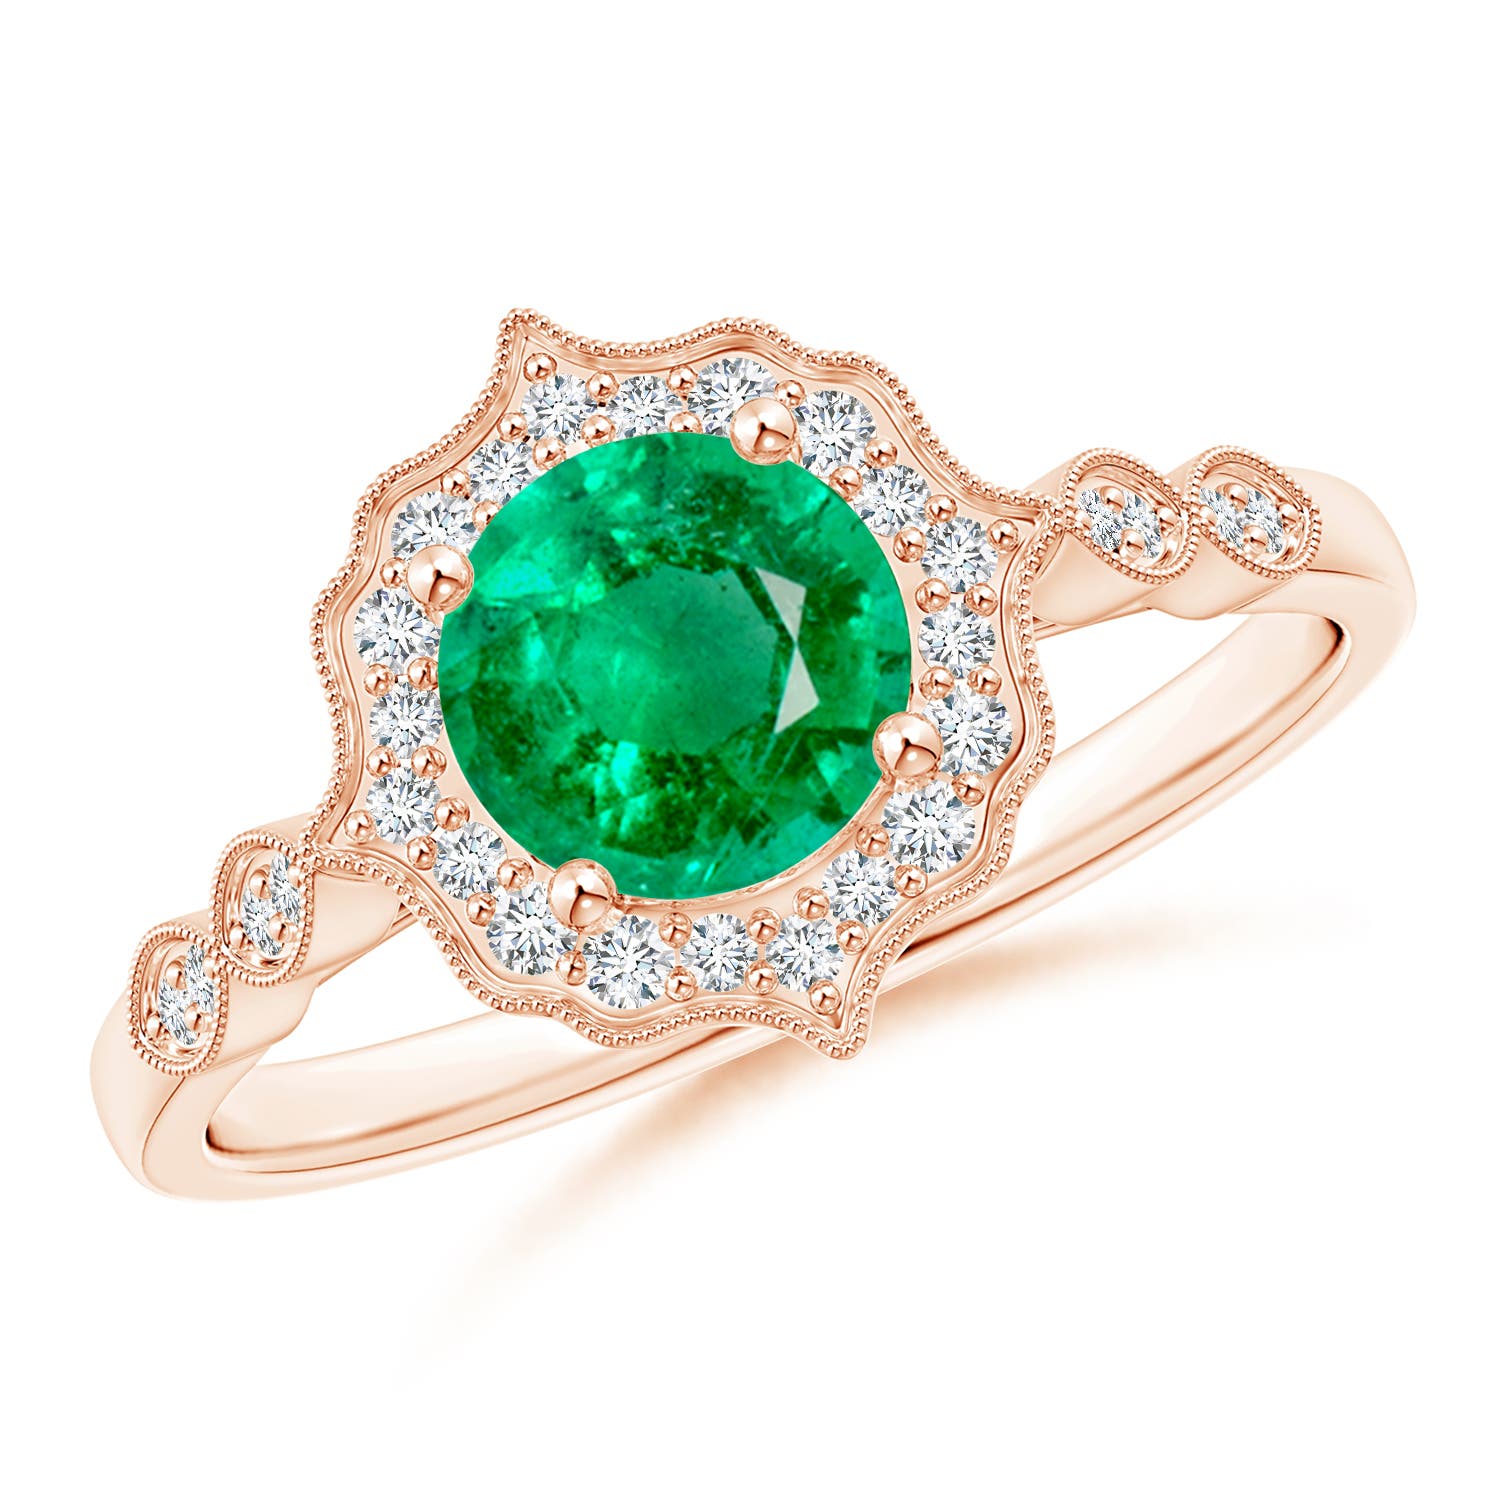 Vintage Inspired Round Emerald Ring with Ornate Halo | Angara